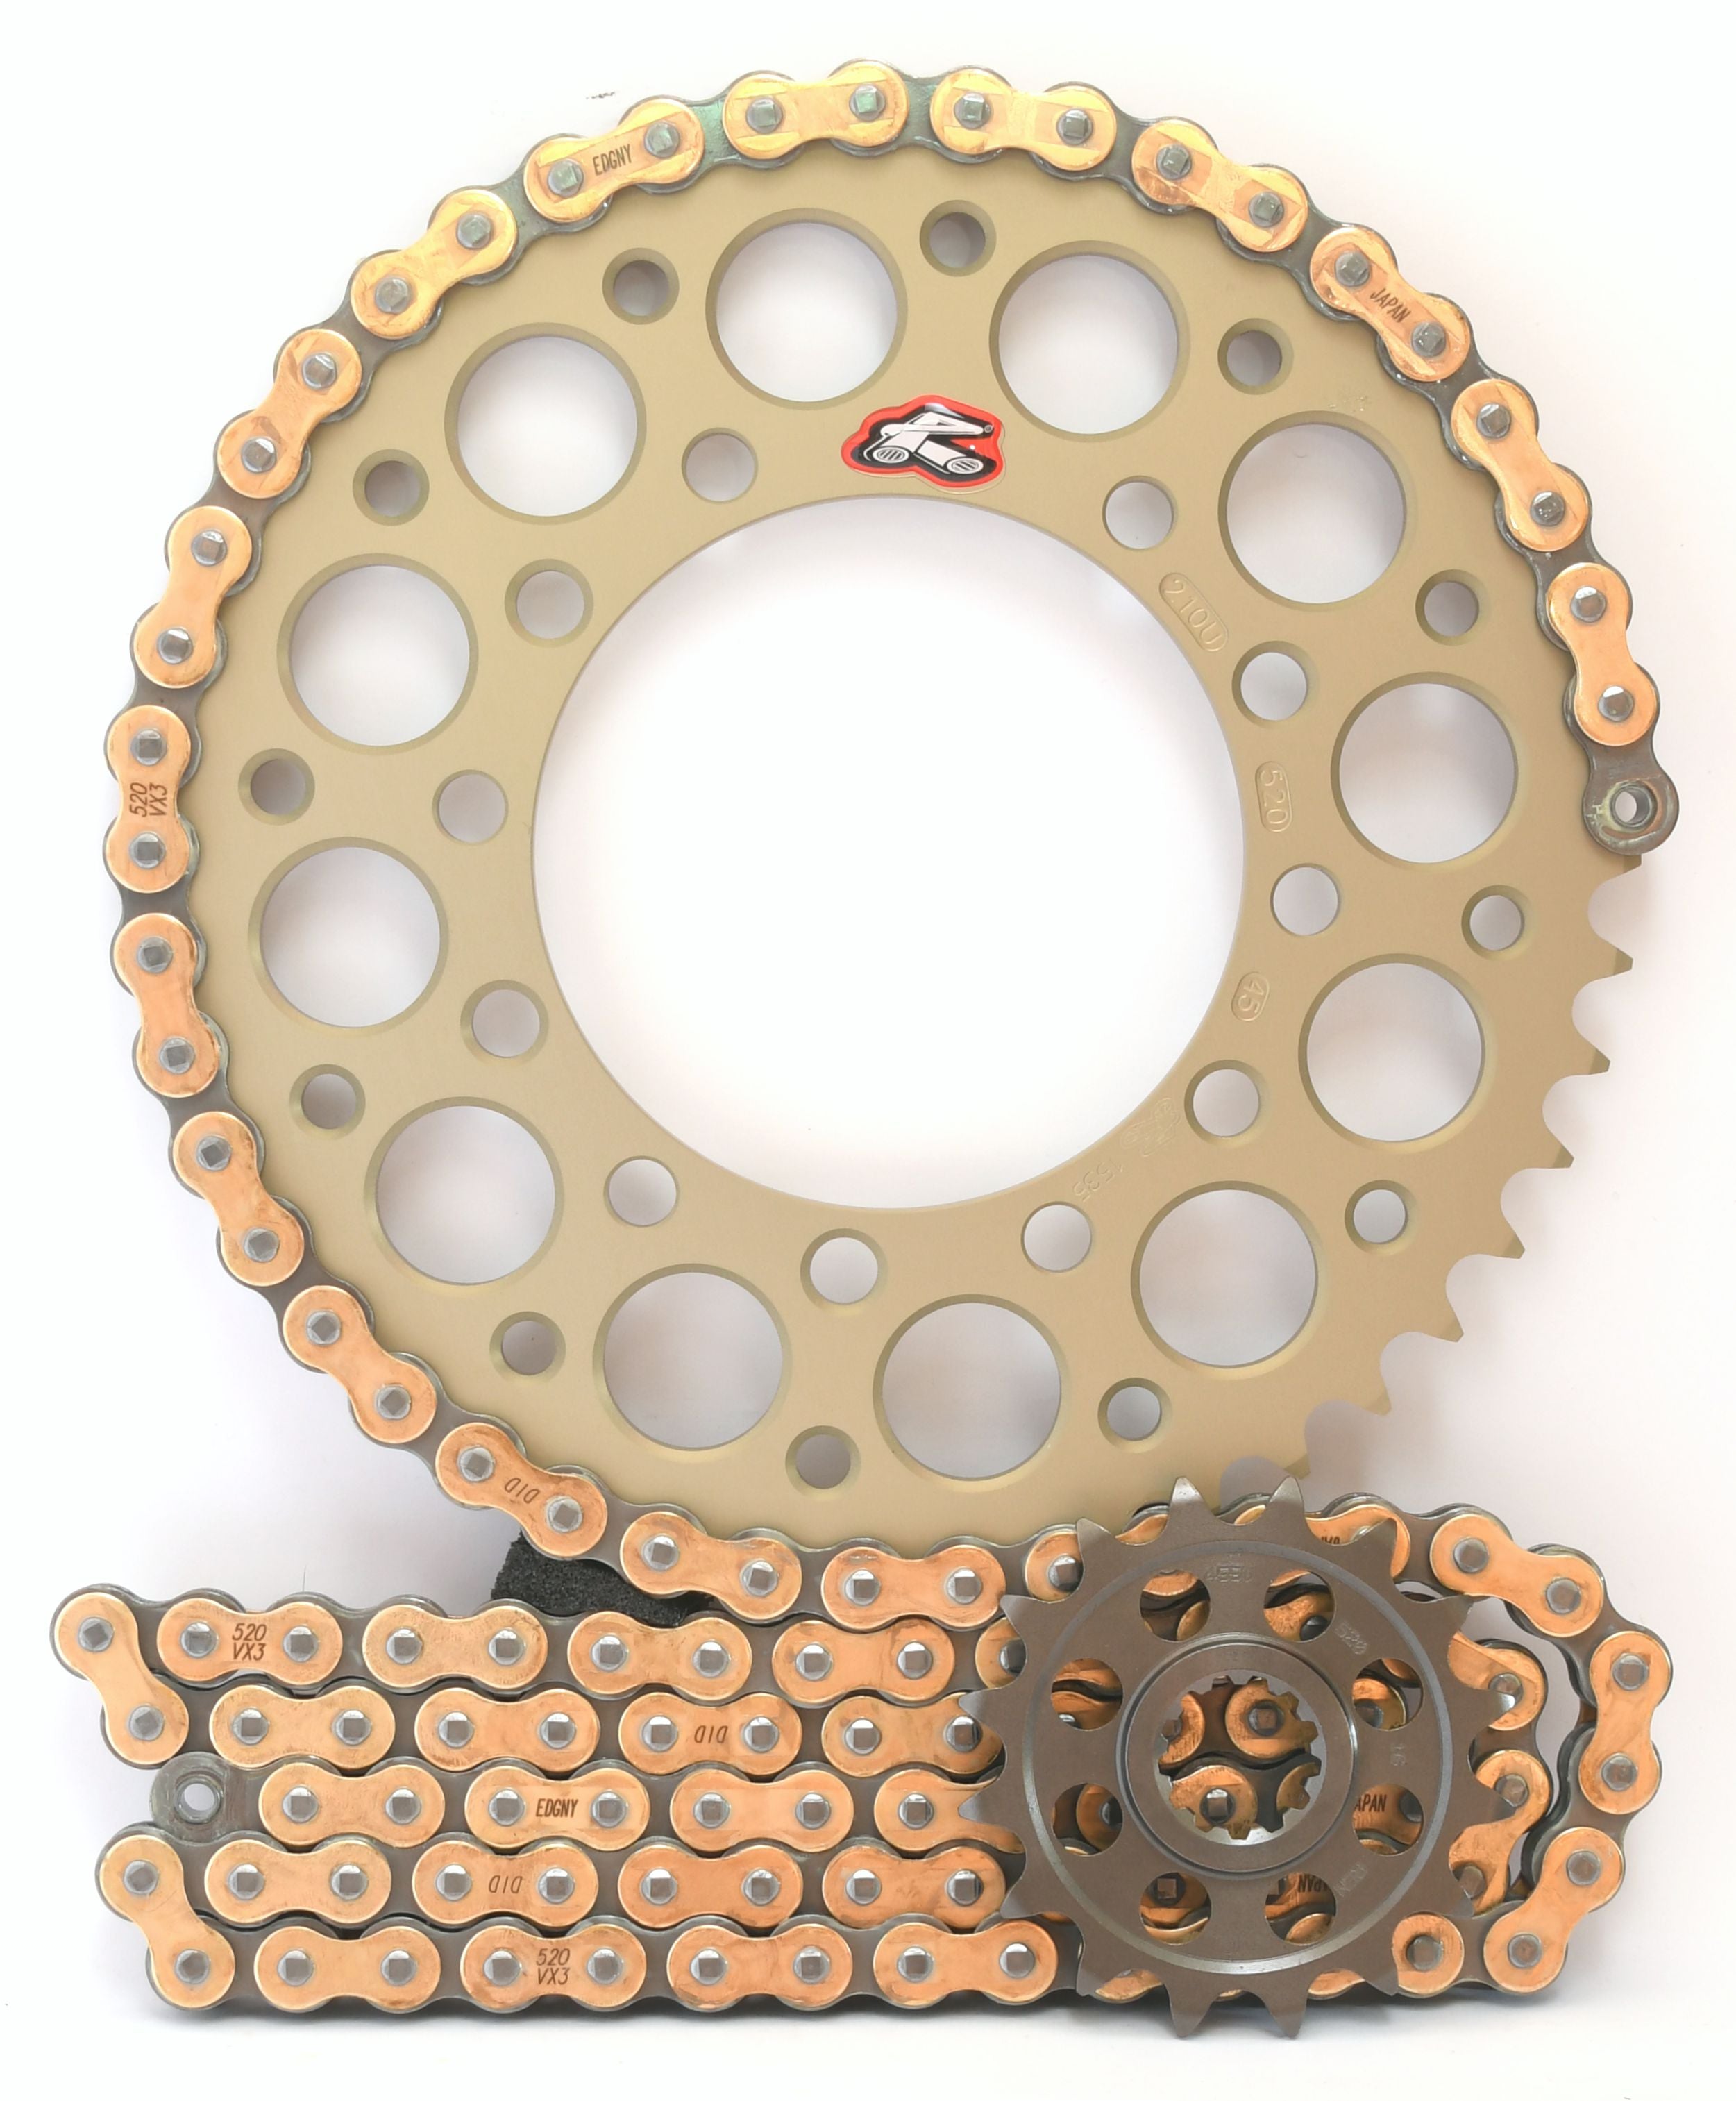 Renthal Ultralight and DID 520 Conversion Chain & Sprocket Kit for Yamaha YZF R1 1998-2003 - Standard Gearing